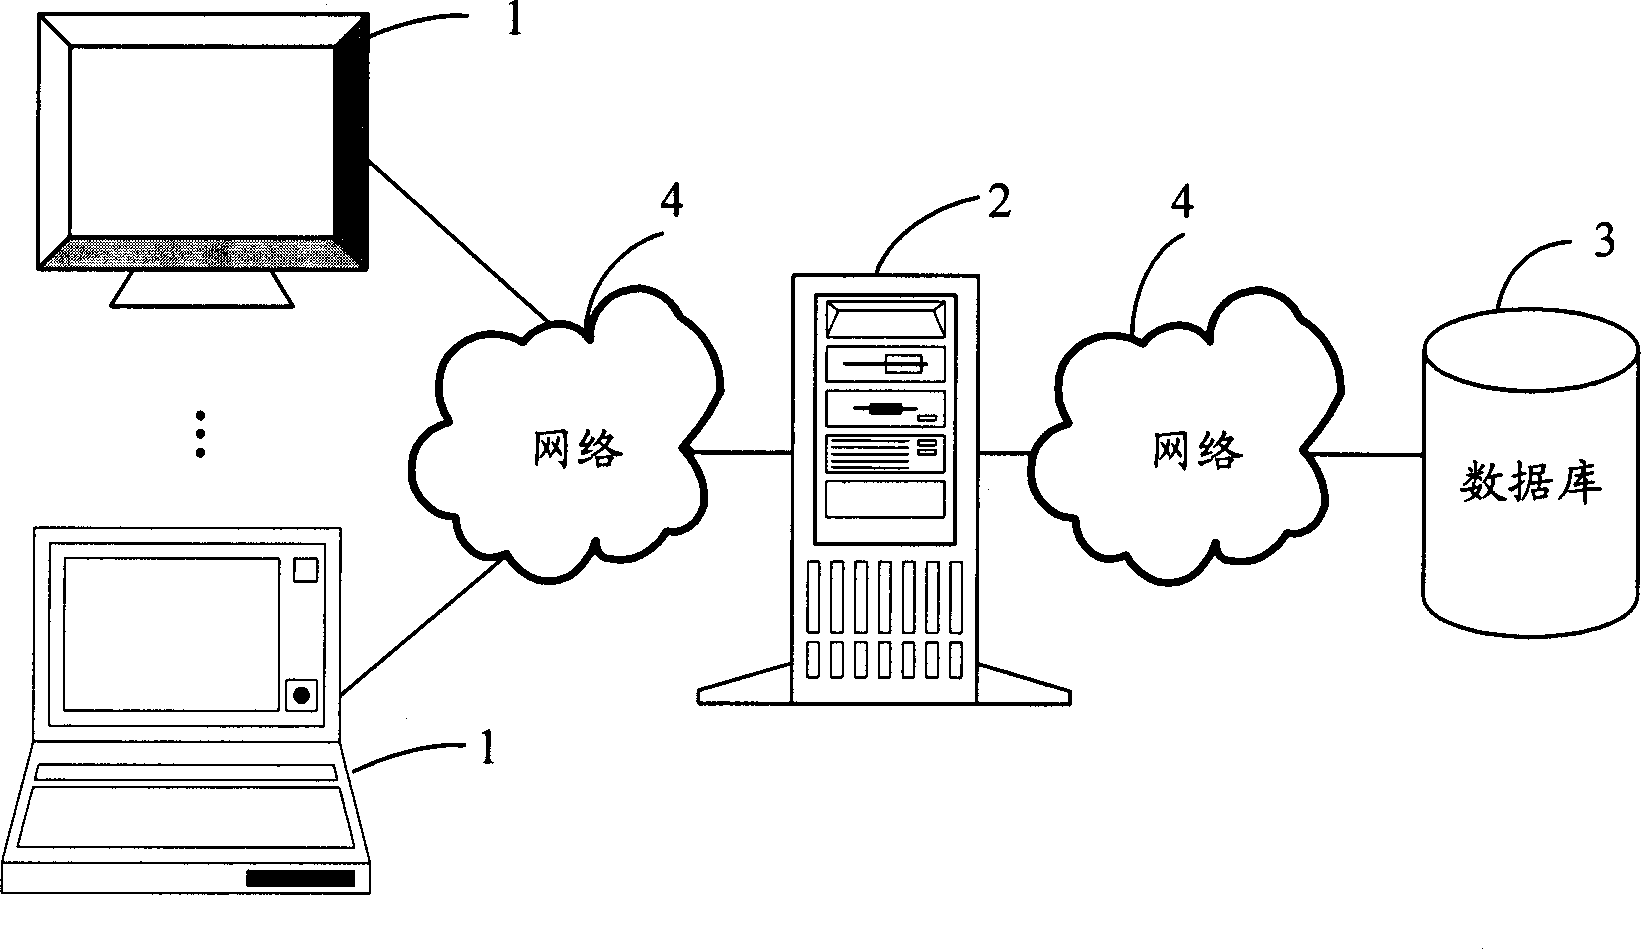 Syntax transformation method for patent information retrieval